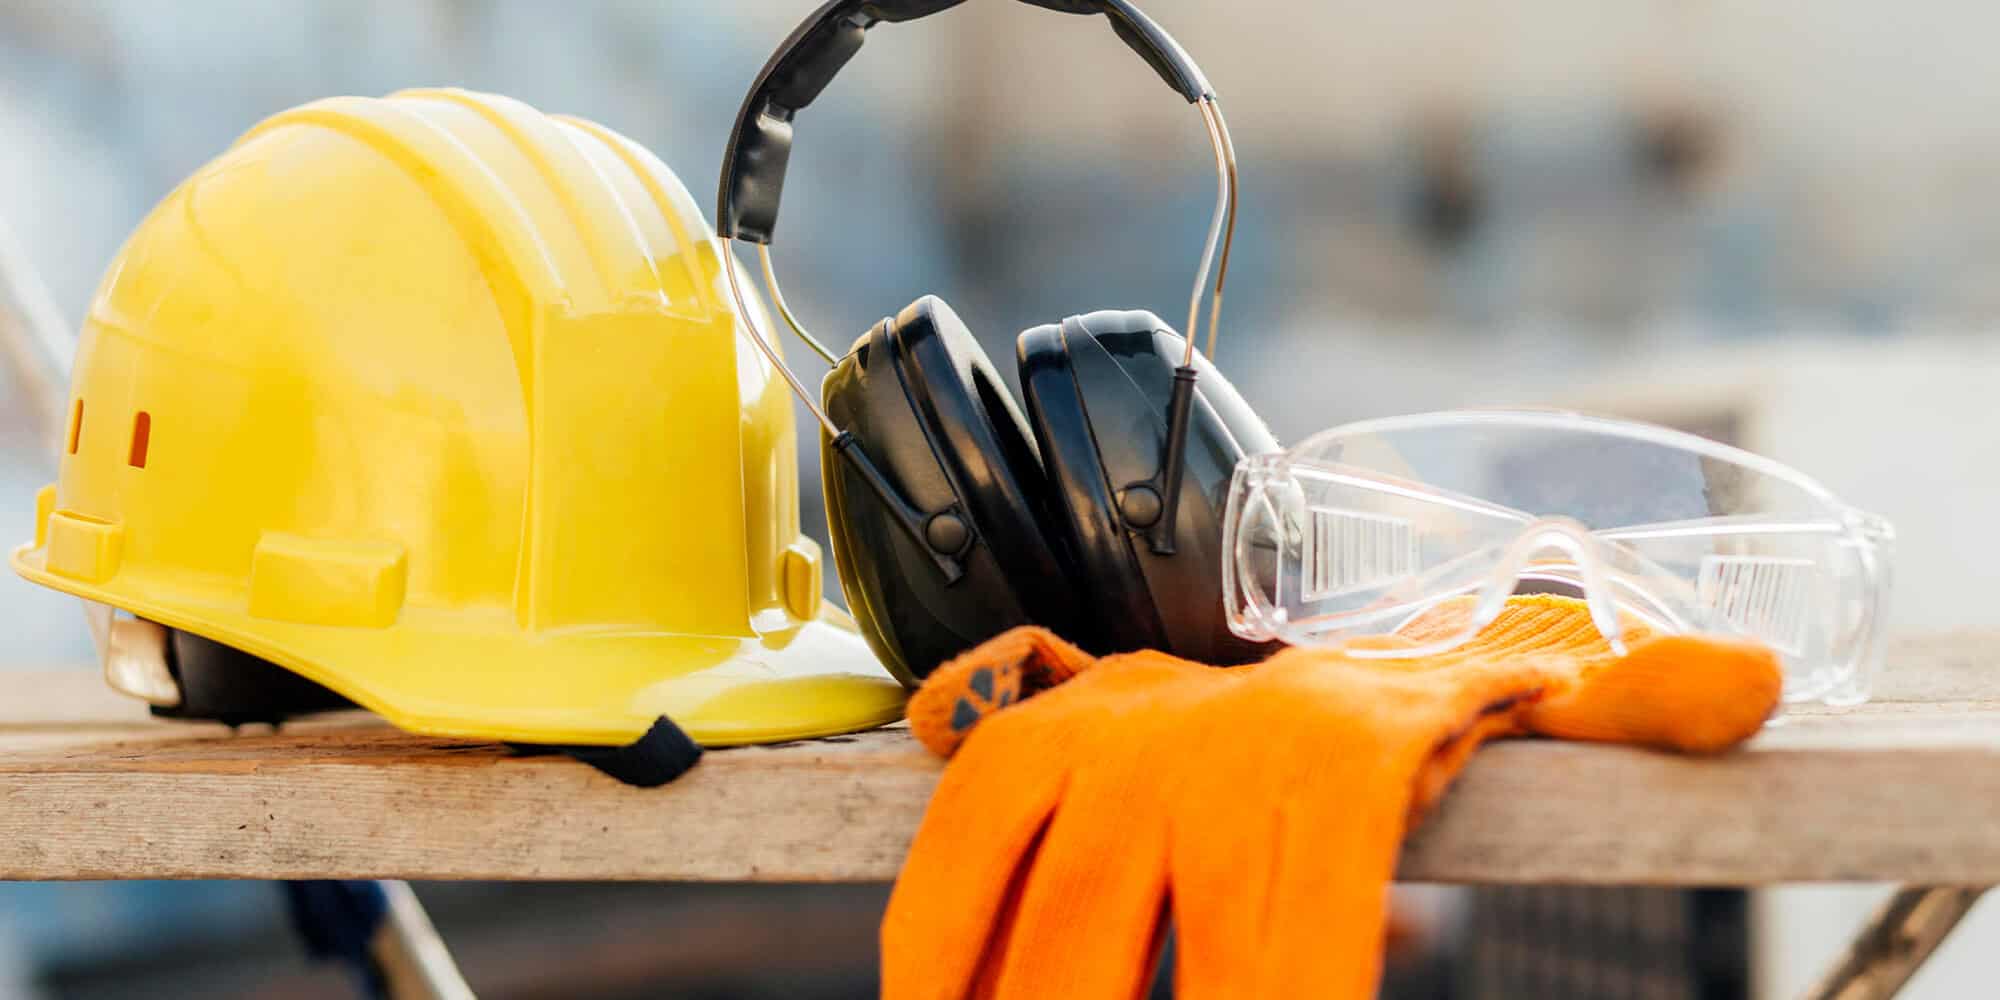 The Ultimate Guide to Personal Protective Equipment - PPE